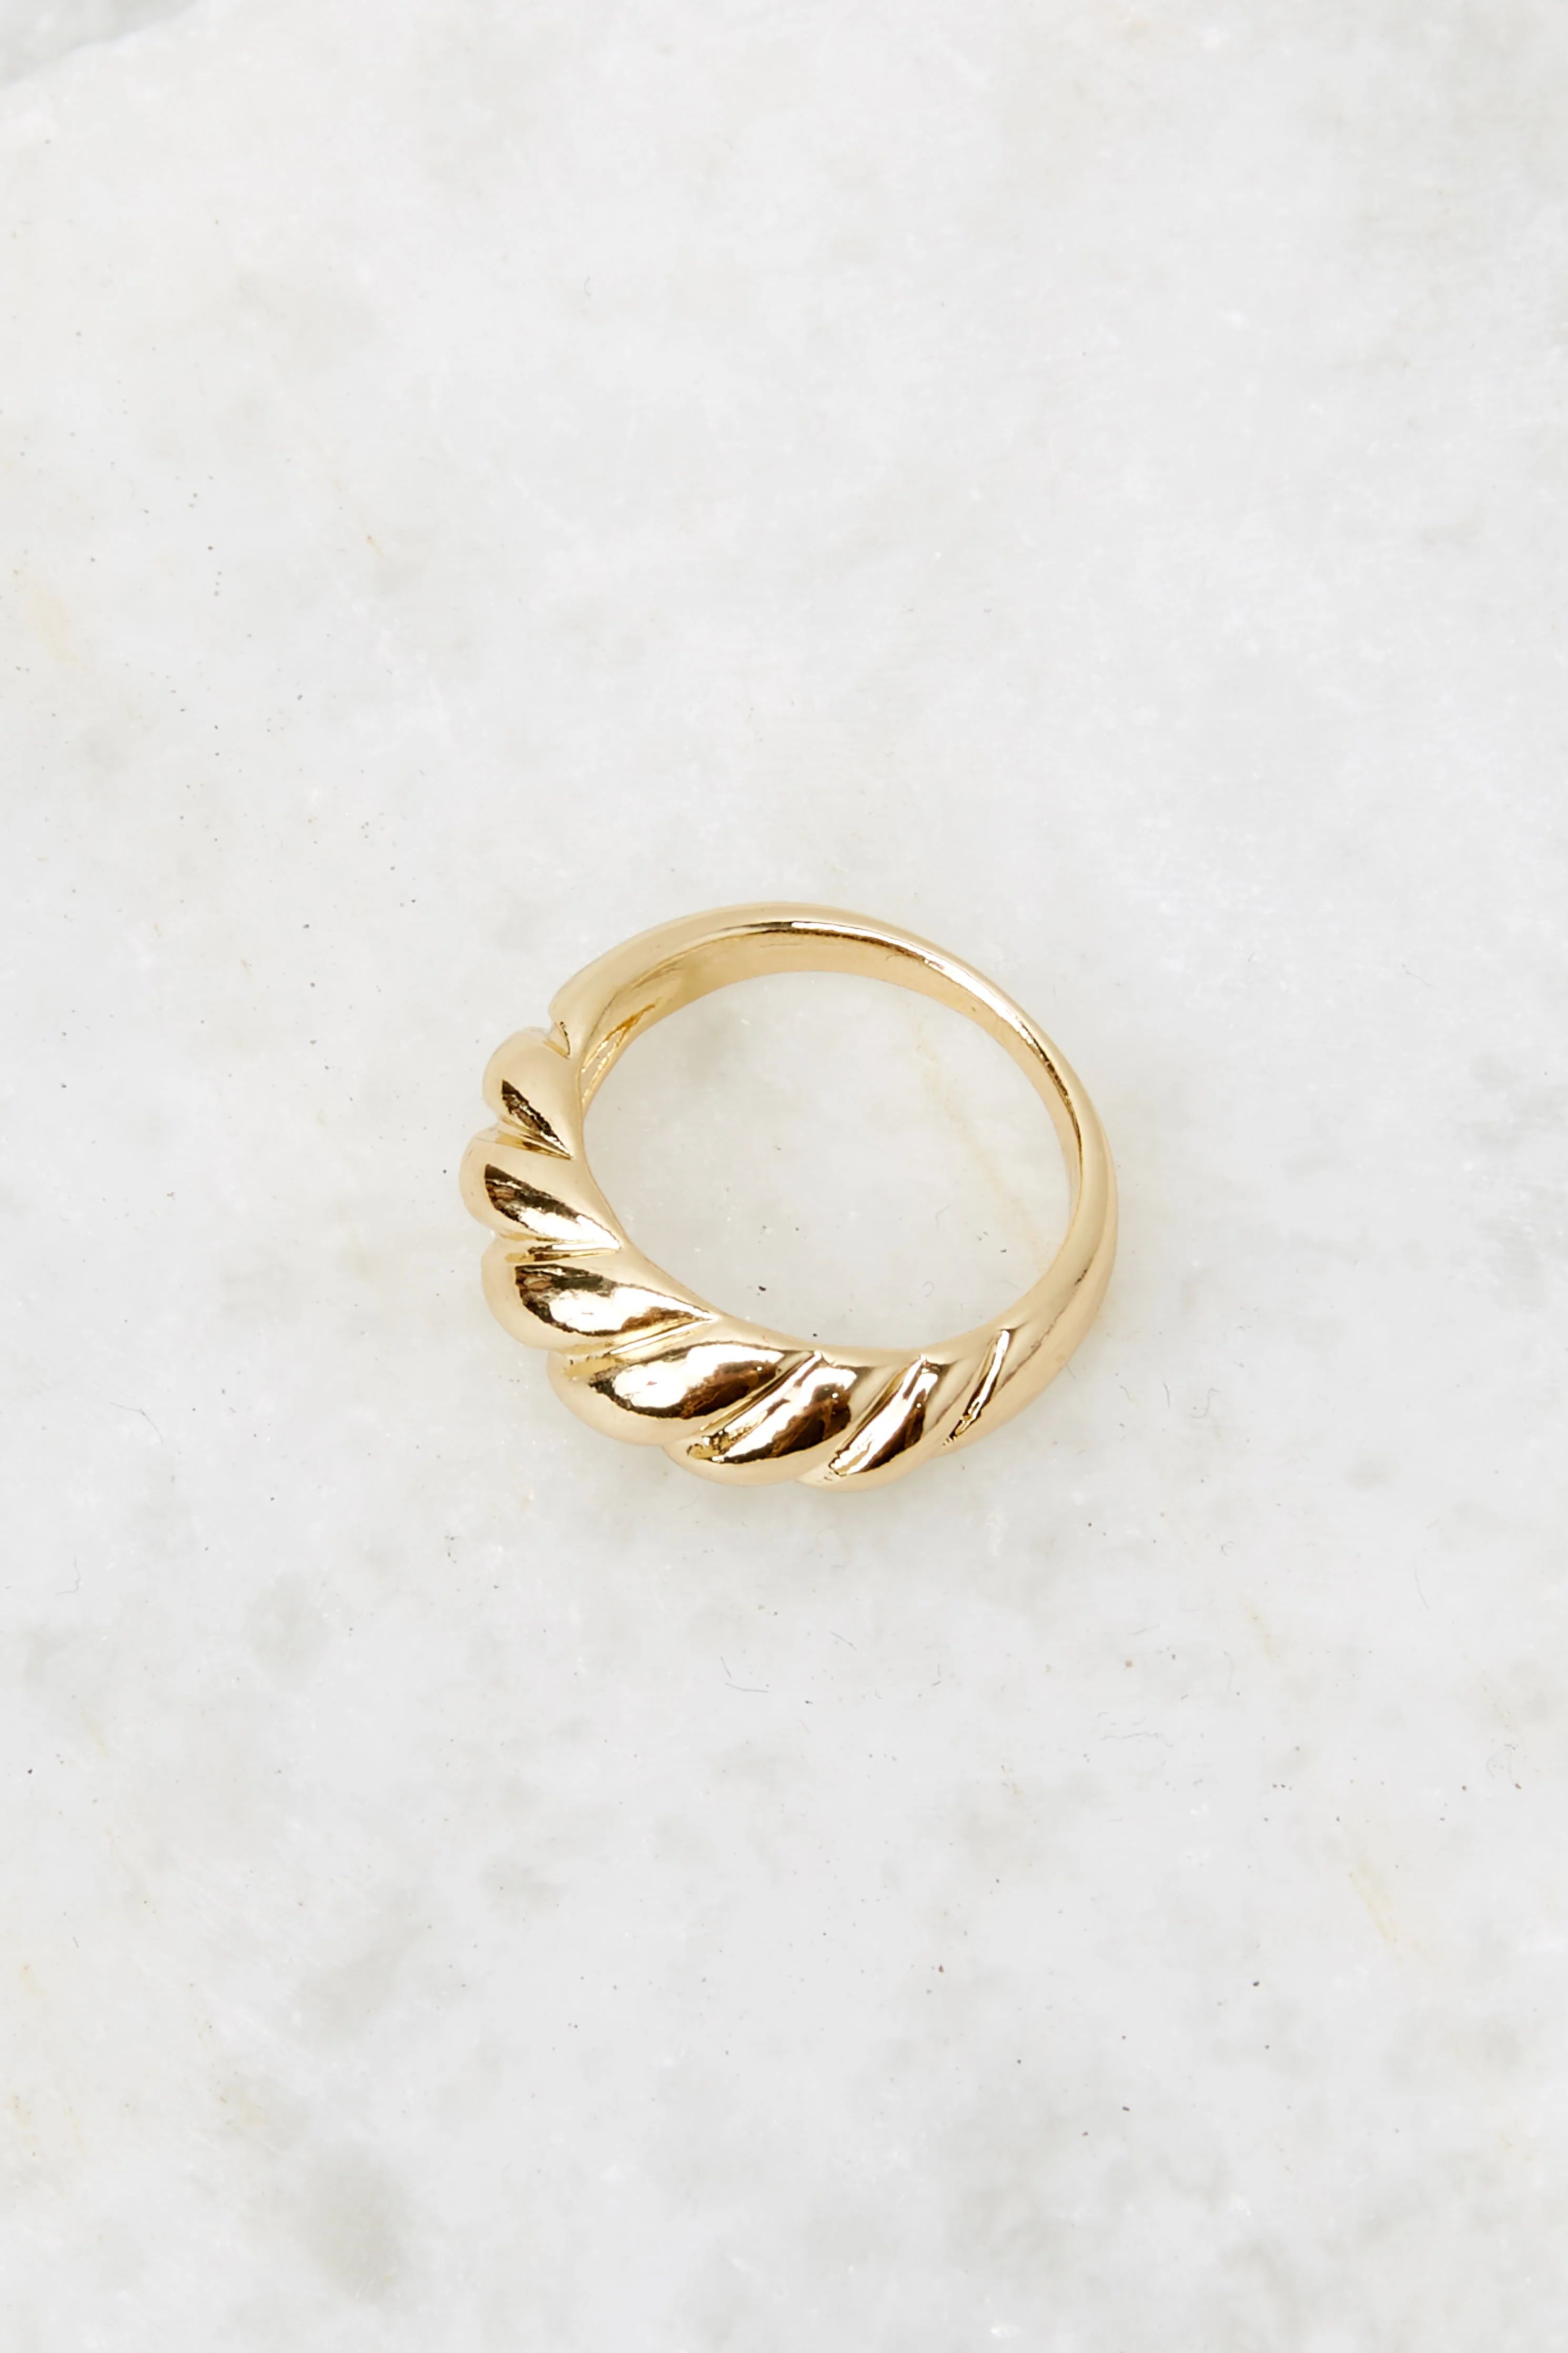 Aiden Croissant Ring | Red Dress 